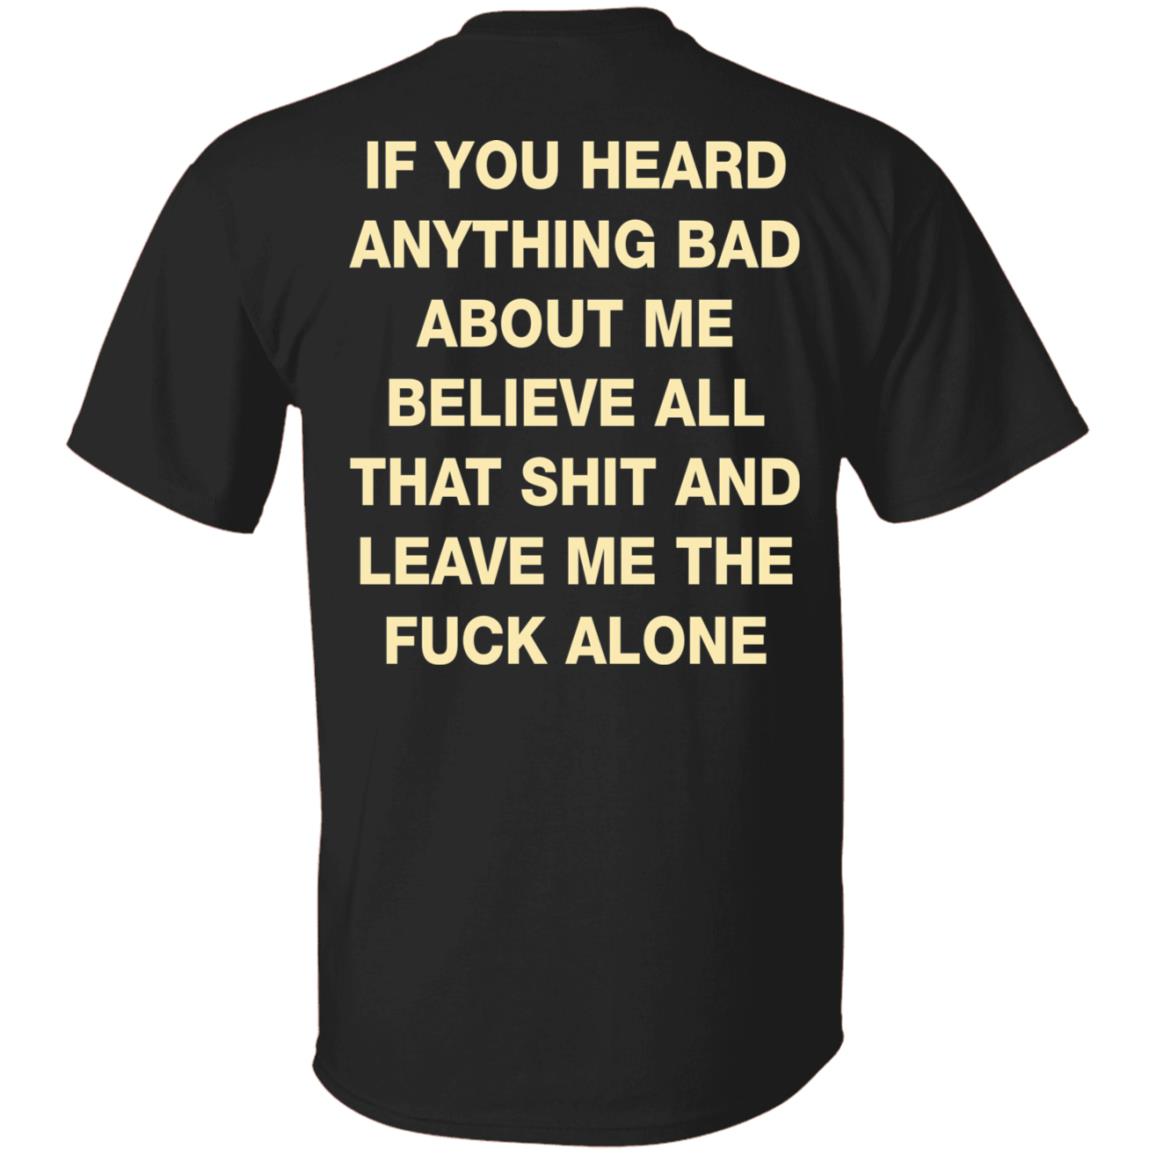 if you heard anything bad about me believe all shirt backside - Lelemoon